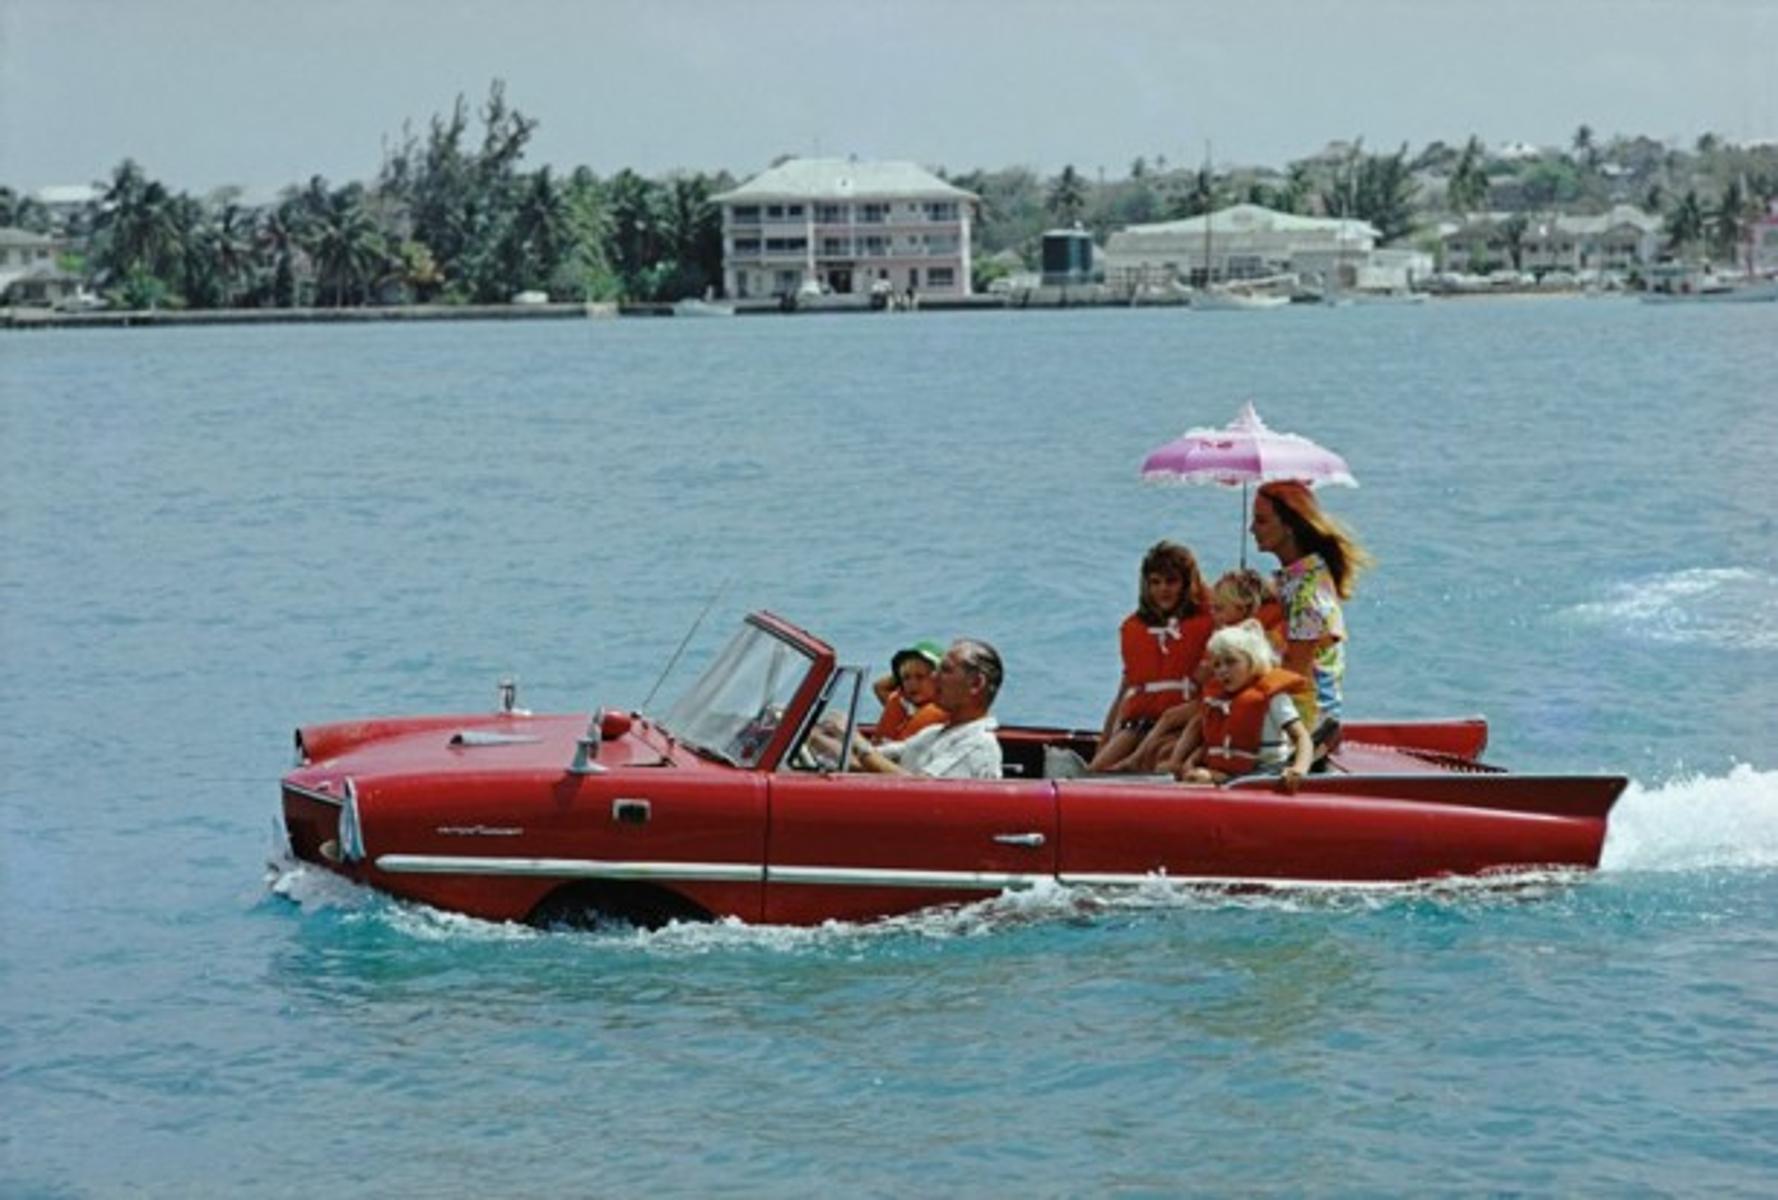 Sea Drive
1967
by Slim Aarons

printed 2023
Slim Aarons Limited Estate Edition

Film producer Kevin McClory takes his wife Bobo Sigrist and their family for a drive in an ‘Amphicar’ across the harbour at Nassau. The children are Bianca Juarez